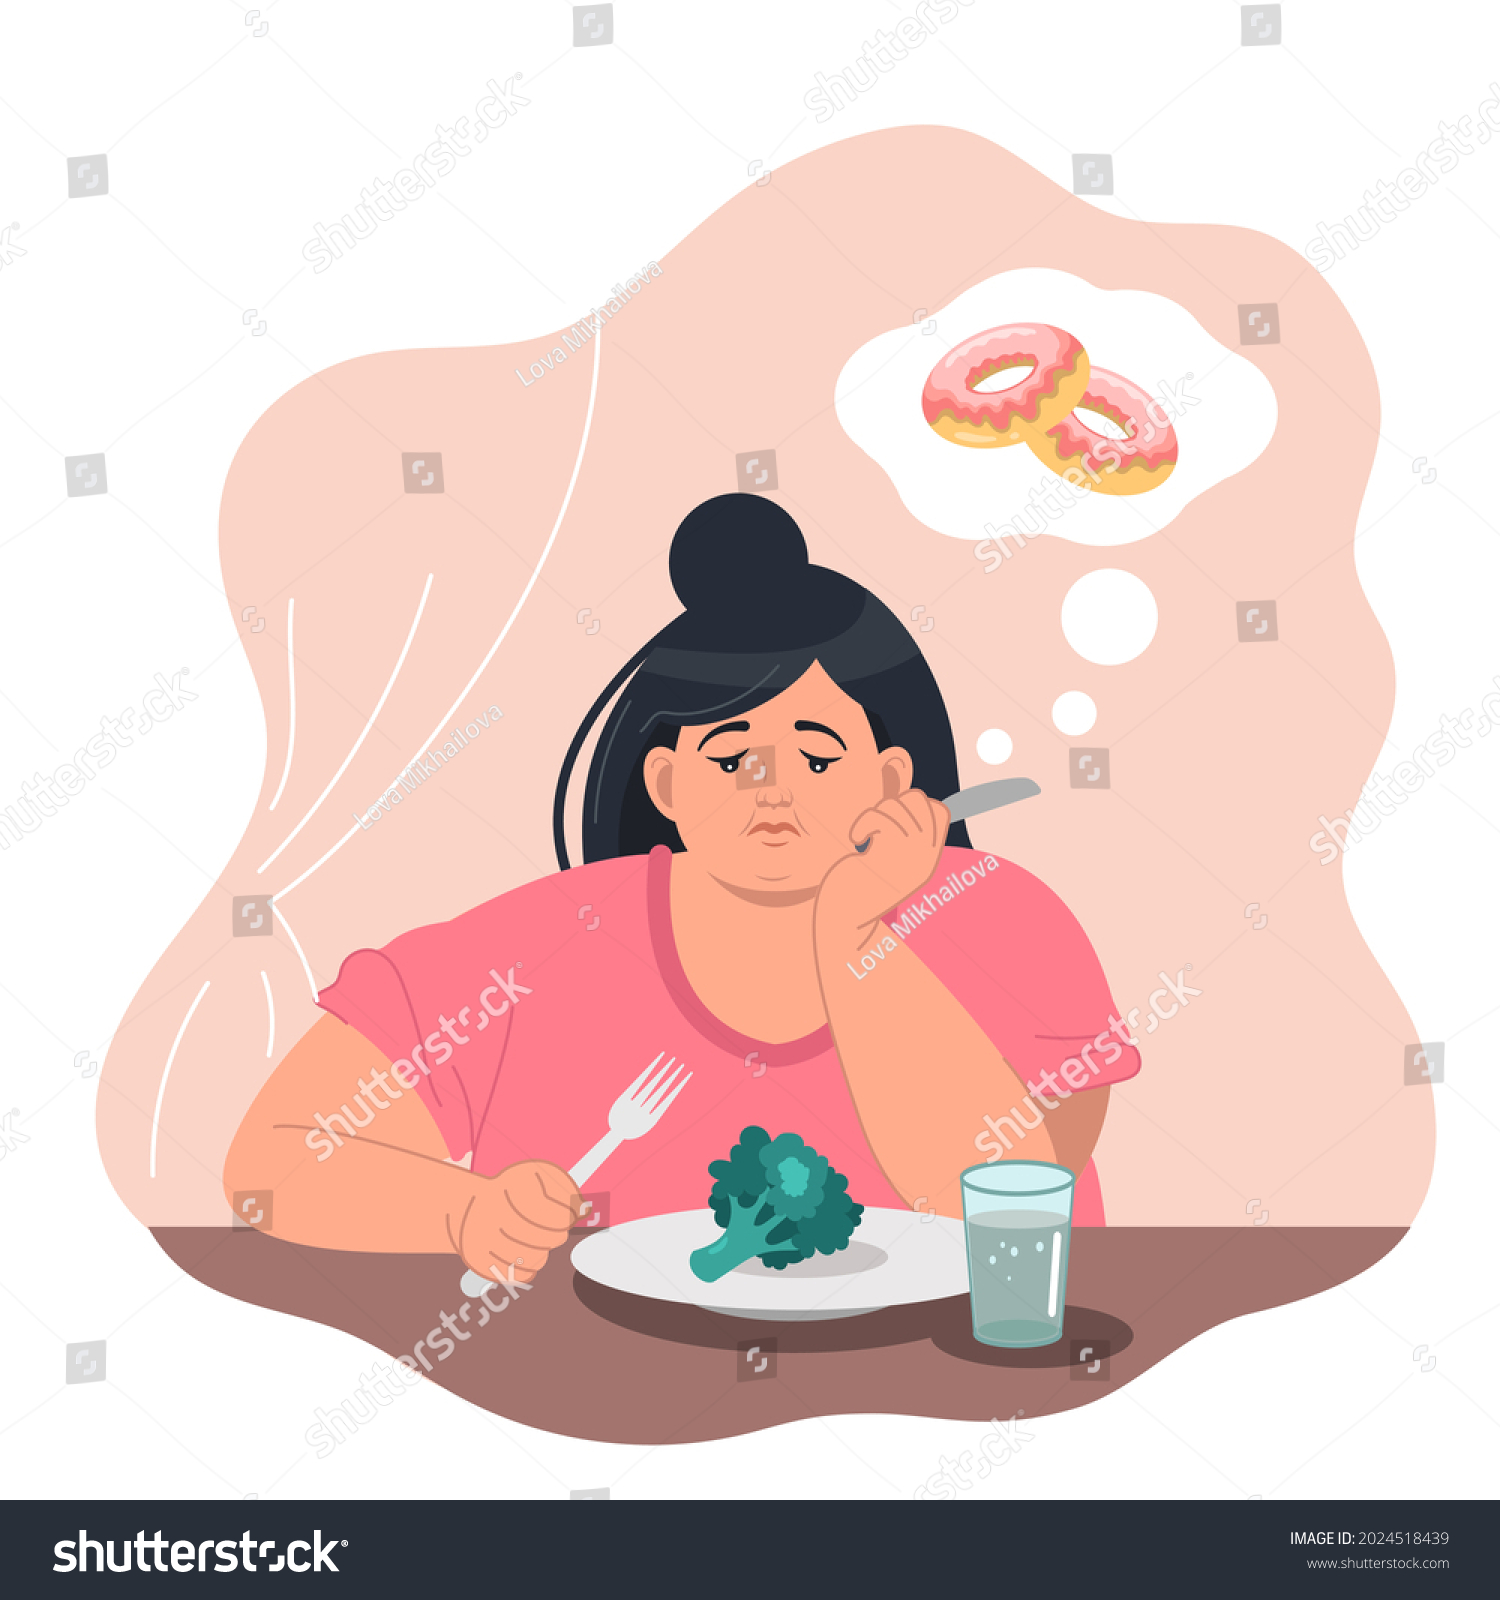 A sad obese woman is sitting at the table with a plate of broccoli. A woman on a diet dreams of a donut. Healthy lifestyle and bad habits. The concept of weight loss and diet. Vector illustration #2024518439